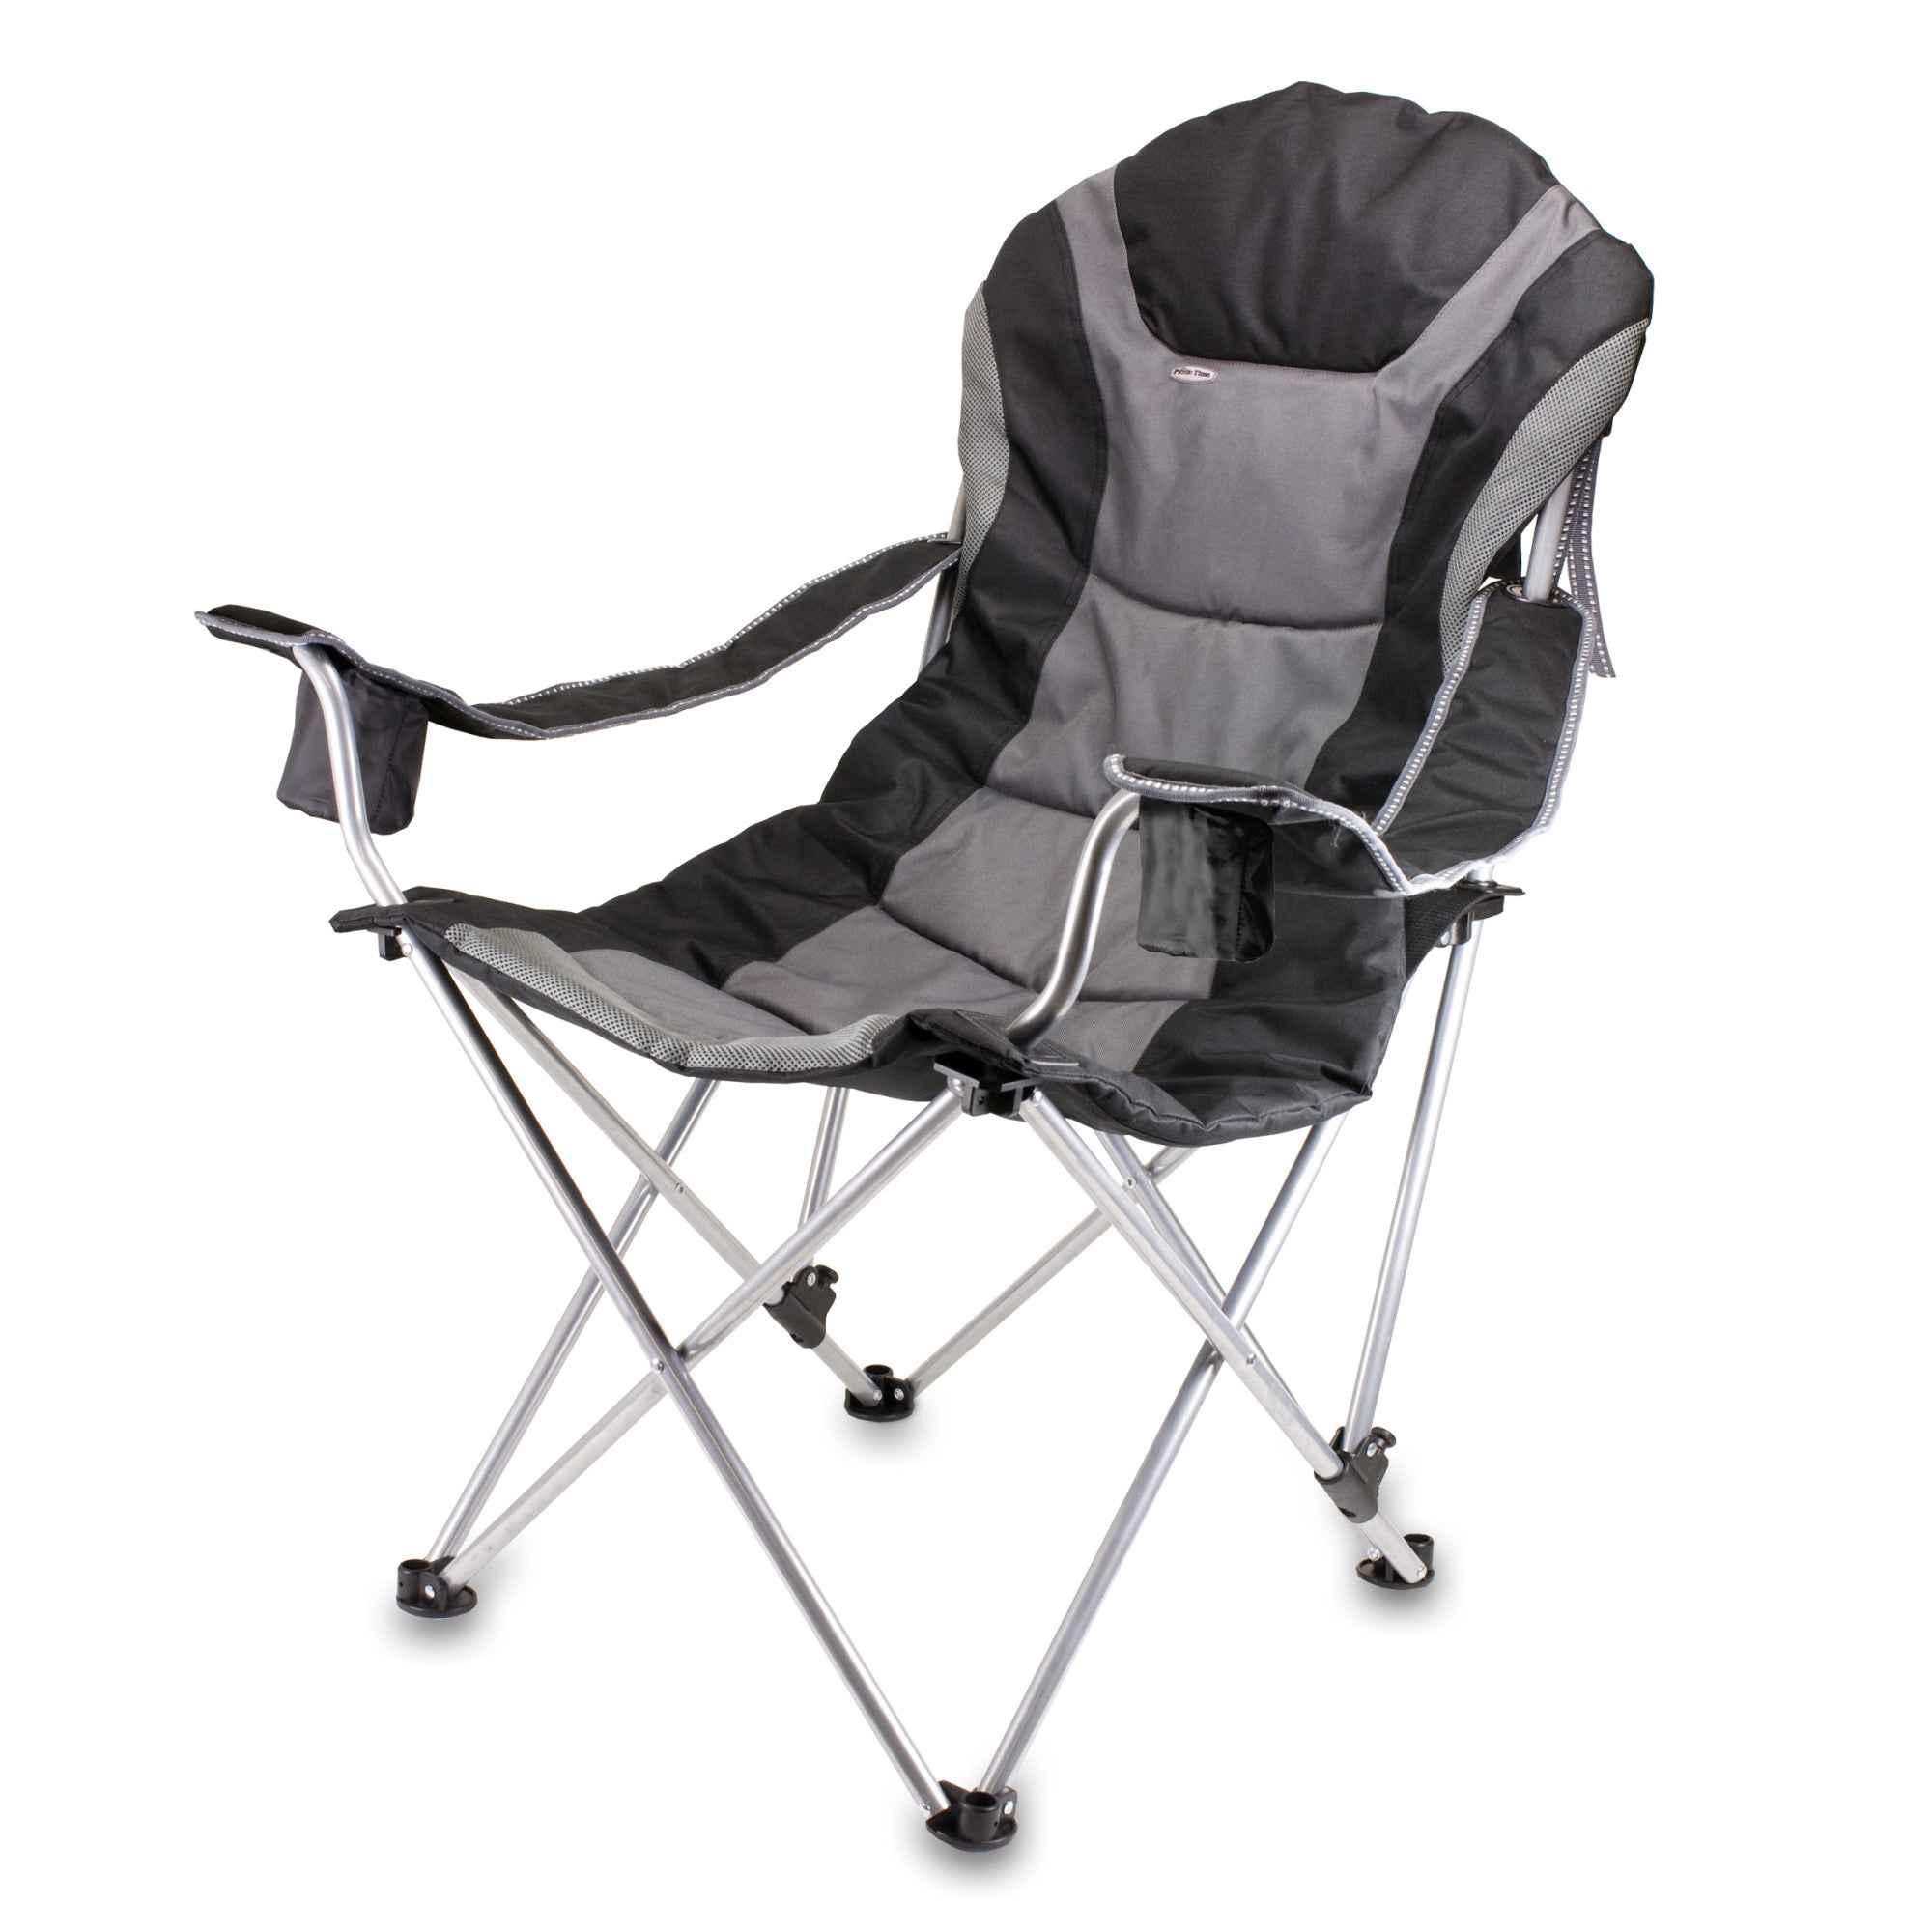 Colorado Avalanche - Reclining Camp Chair